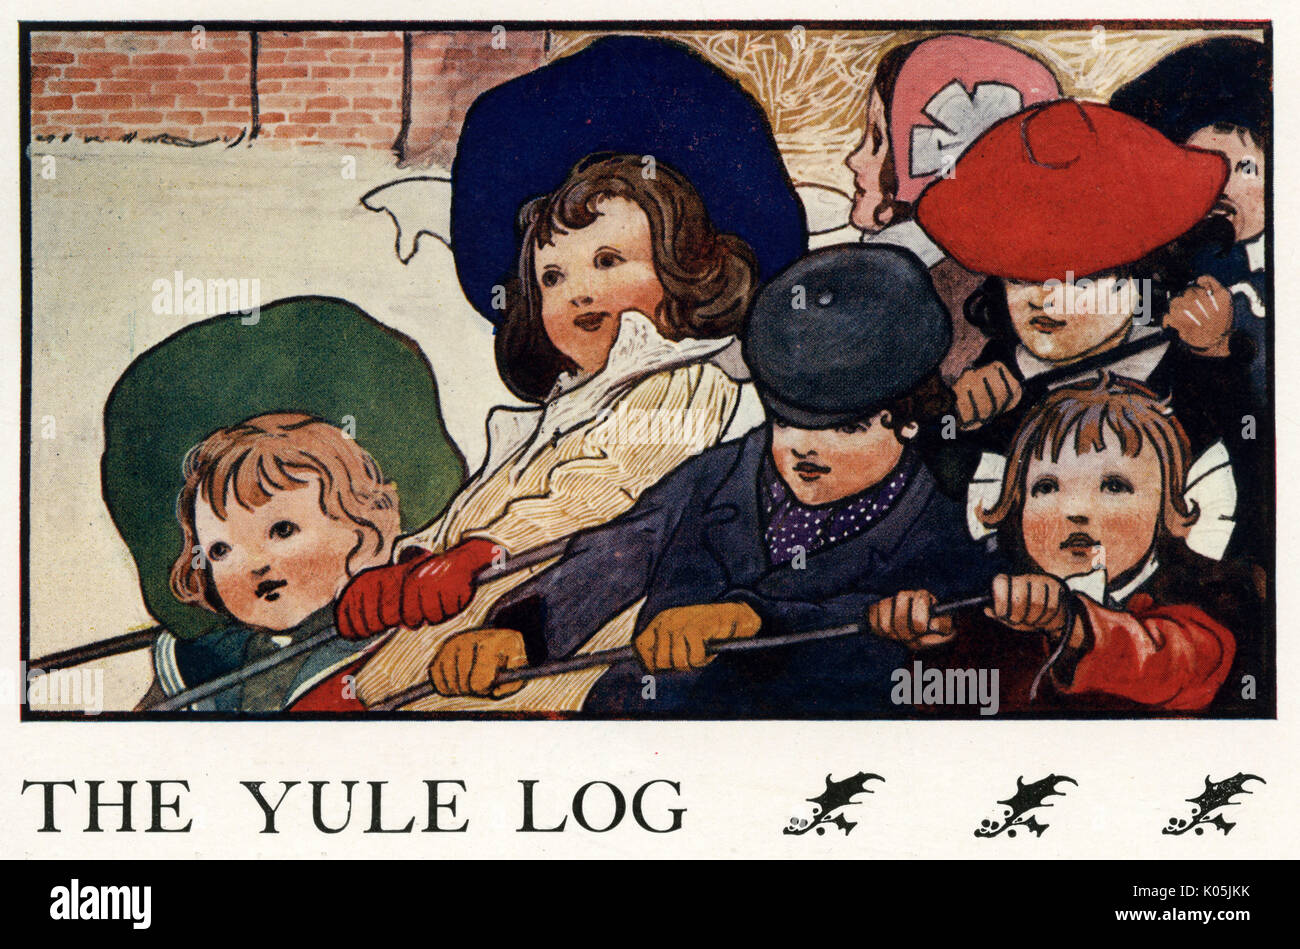 The yule log by Charles Robinson Stock Photo